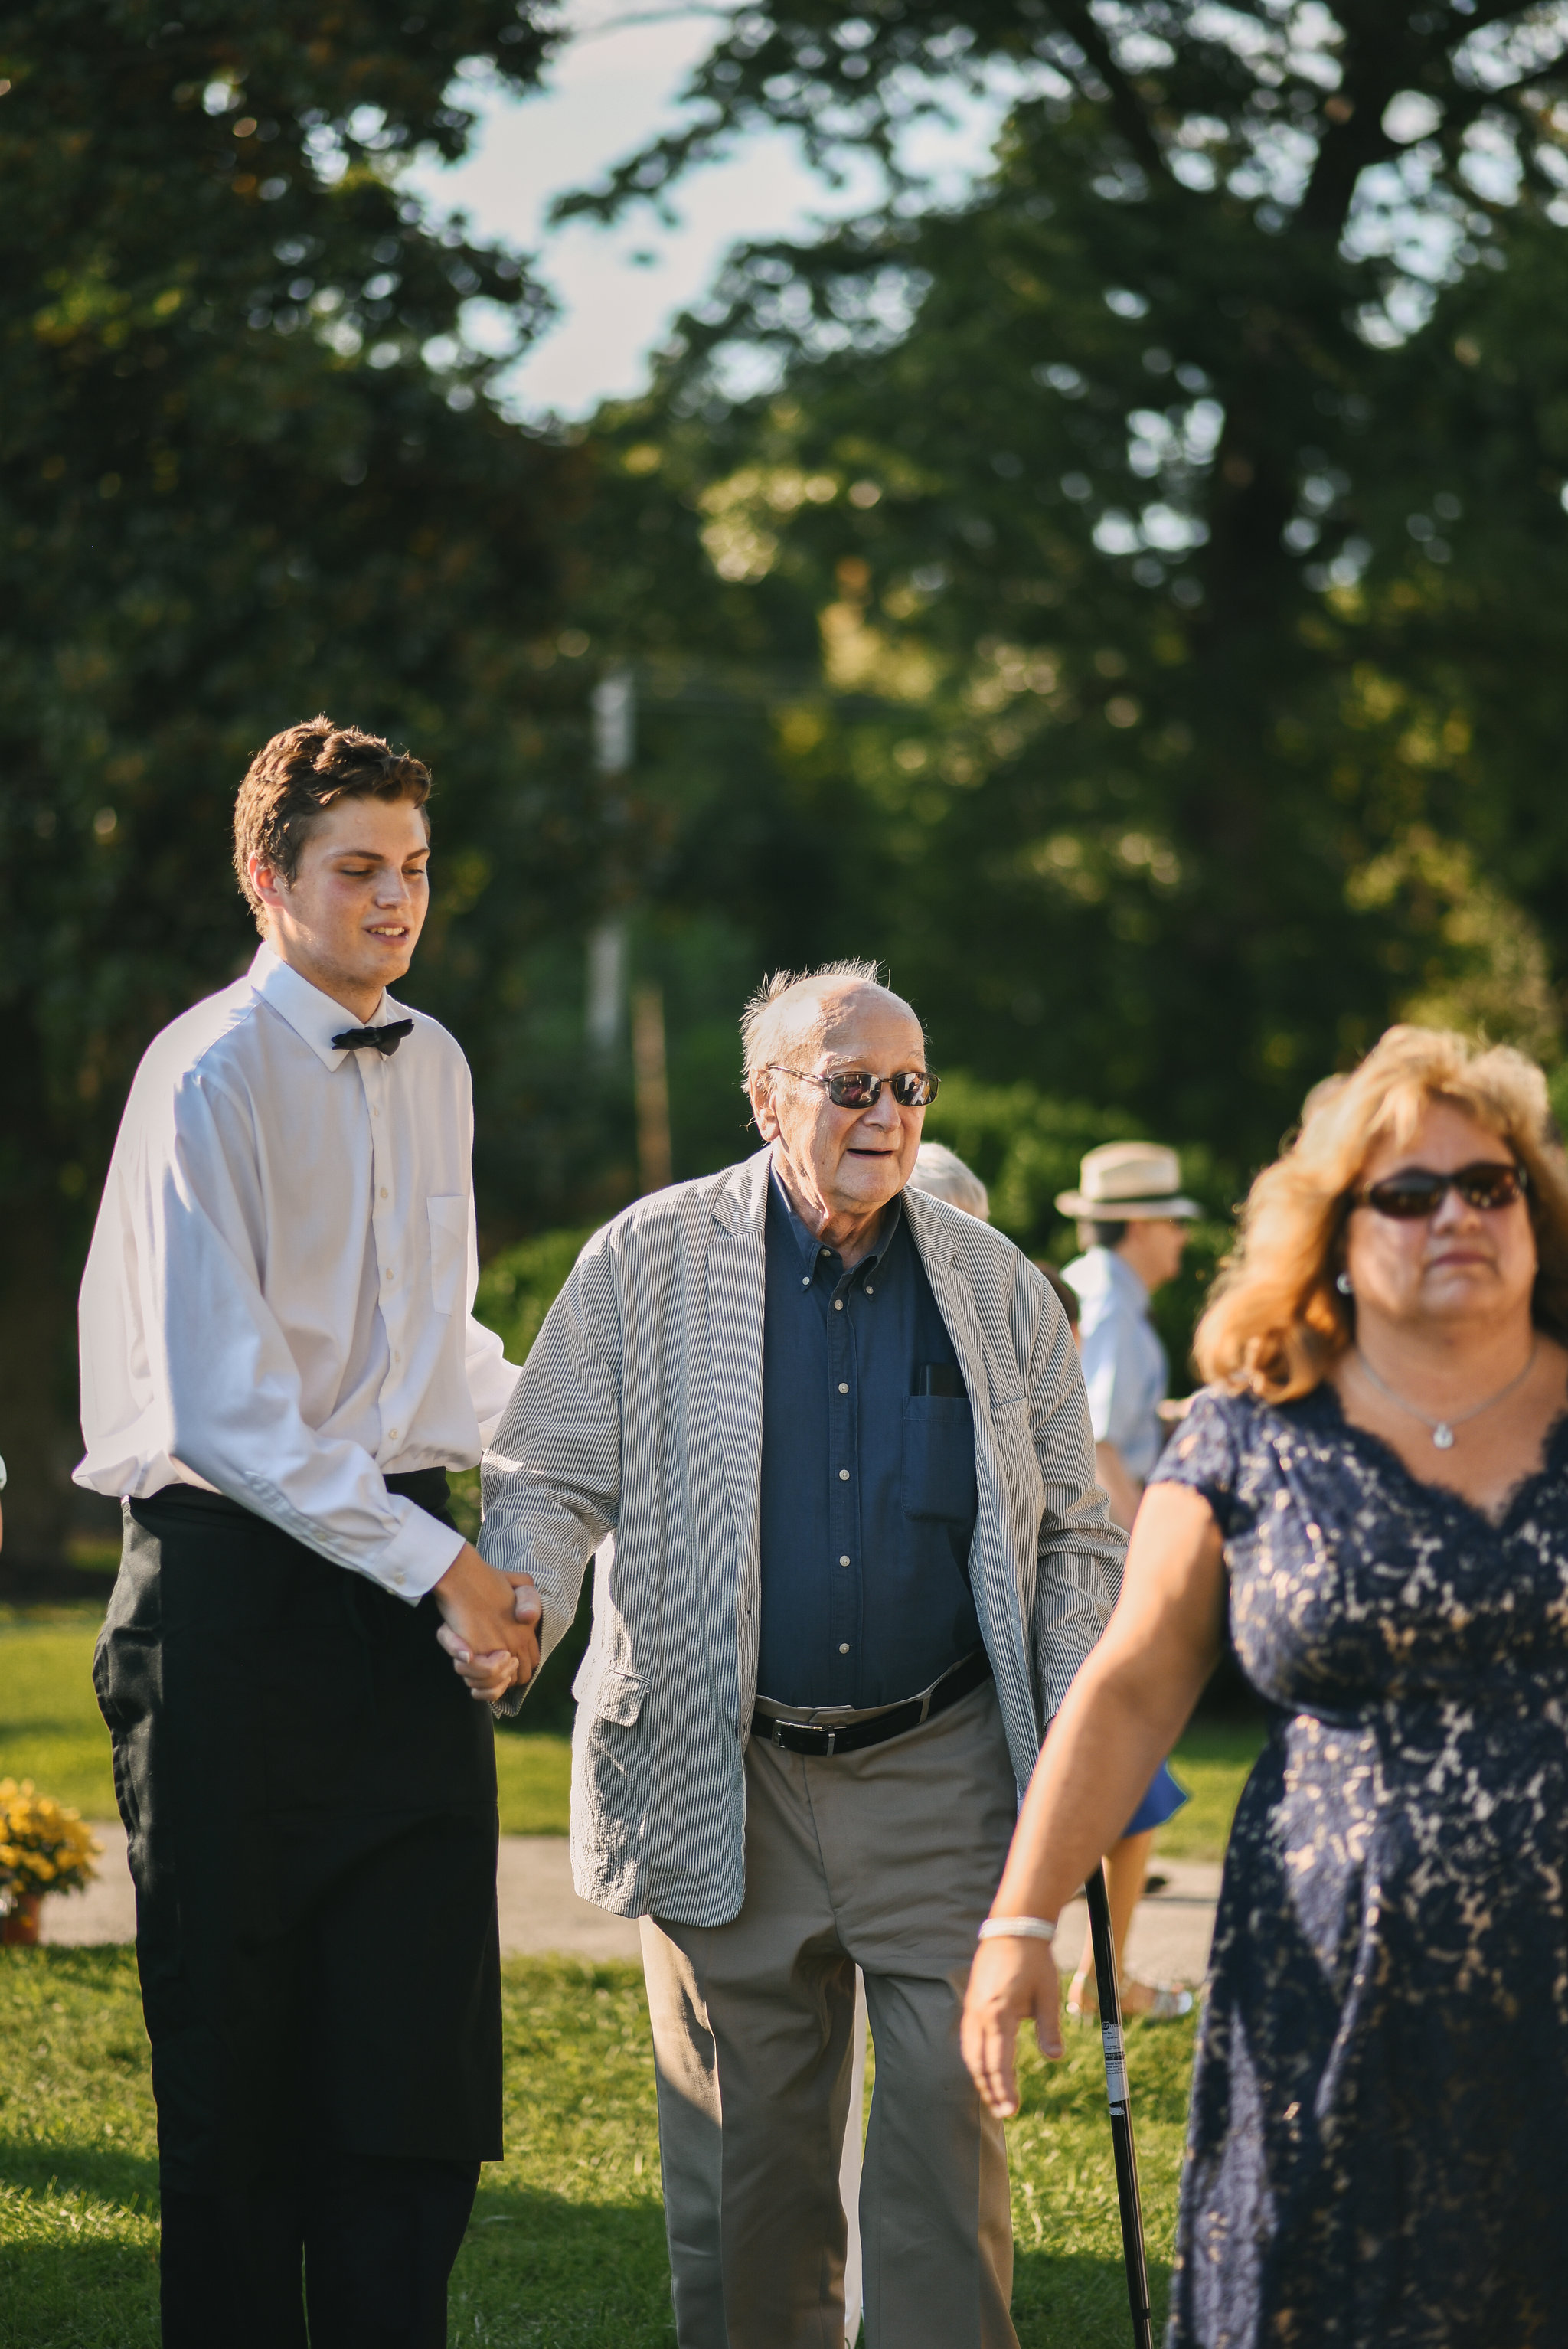  Maryland, Eastern Shore, Baltimore Wedding Photographer, Romantic, Boho, Backyard Wedding, Nature, Family Members Making Their Way to Reception, Guests Walking Outside 